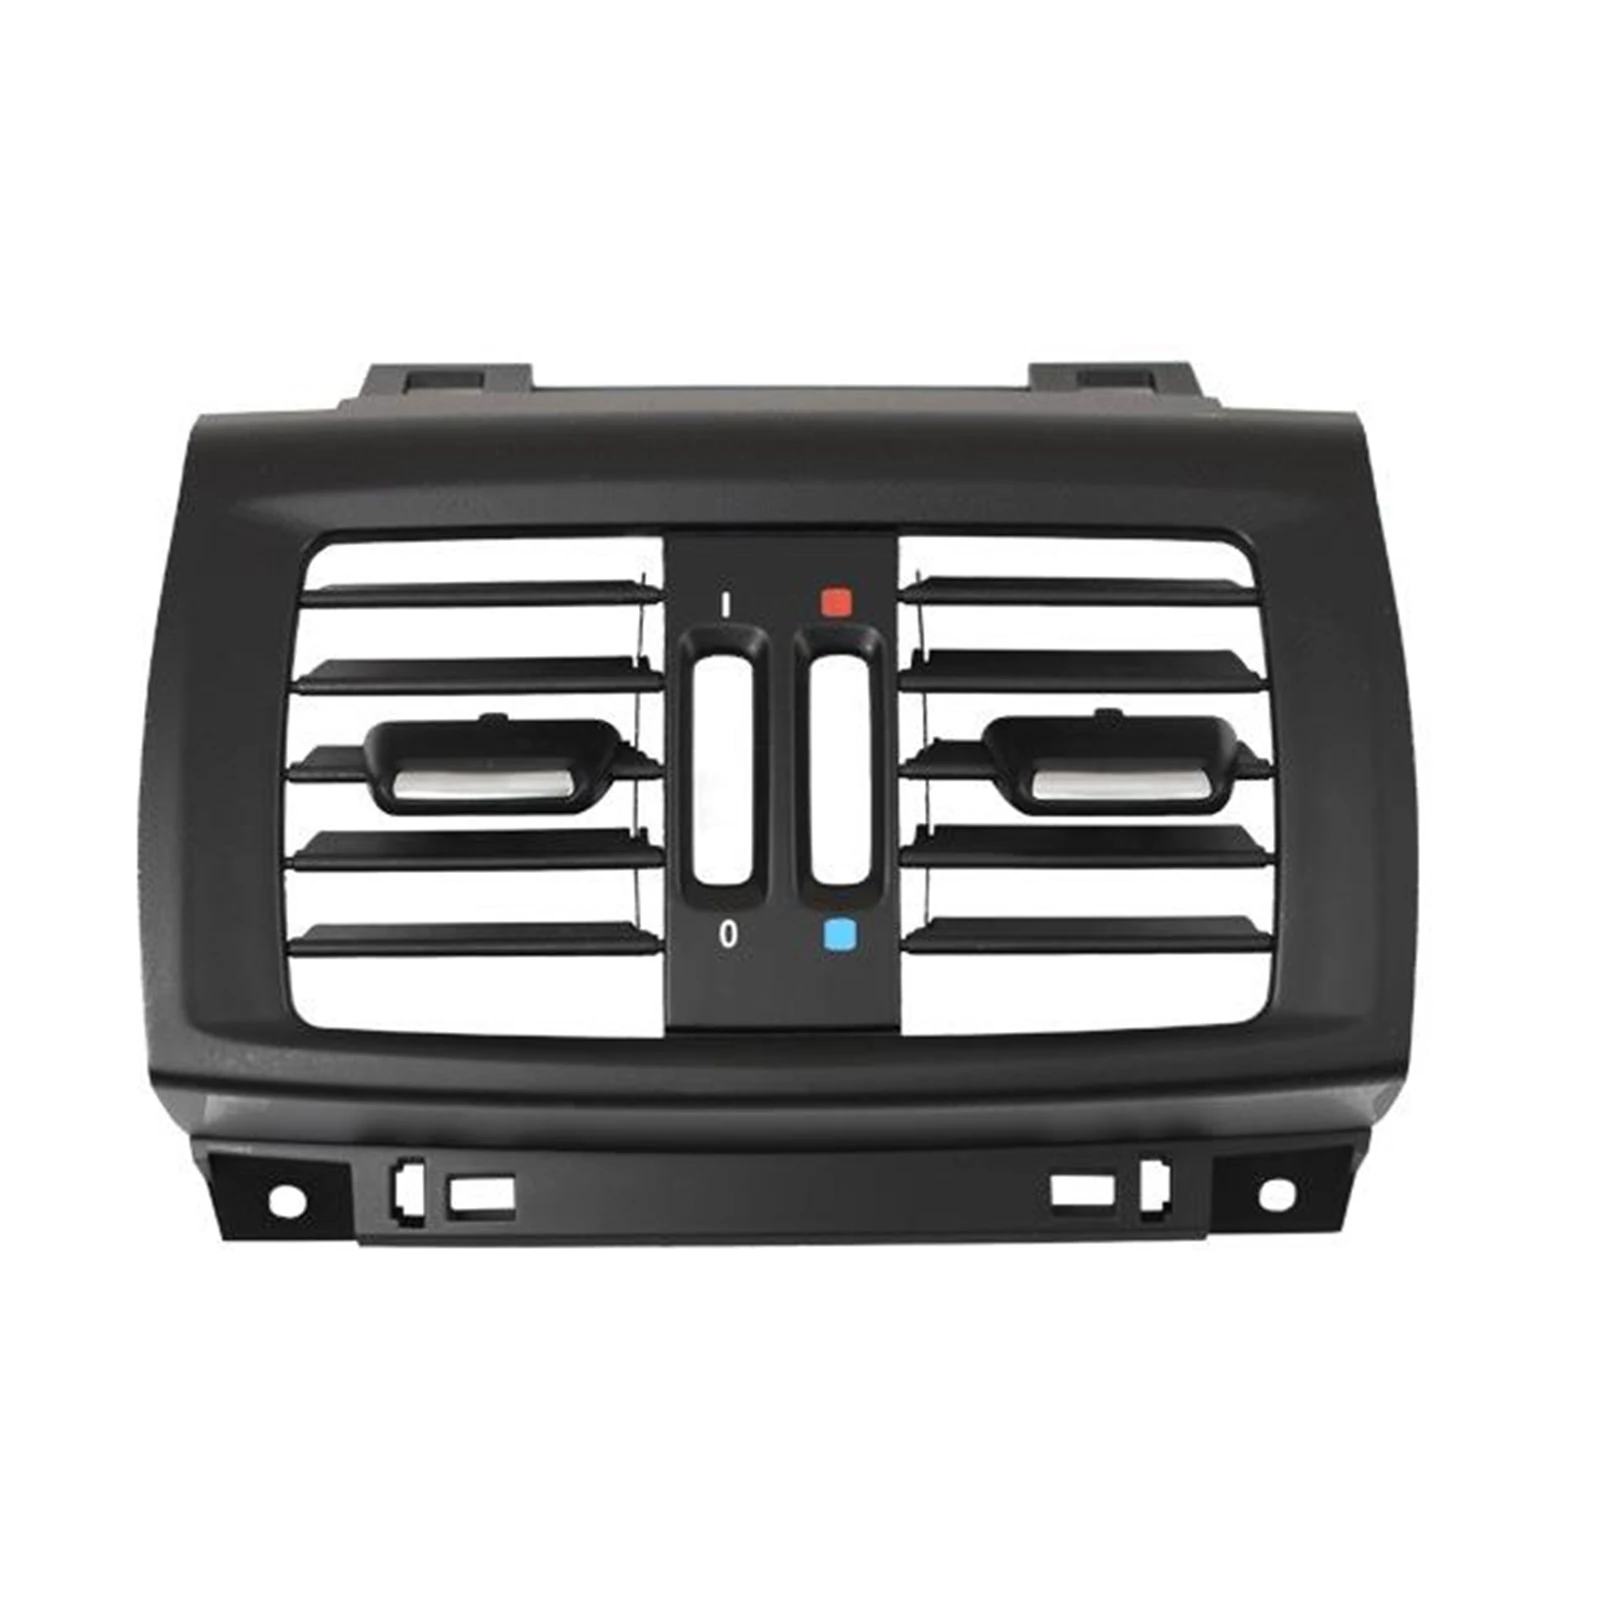 

Center Console Rear Air Conditioning Vent Outlet Dash Flow Grill Frame For BMW X3 F25 X4 2011 2012 2013 2014 2015 2016 2017 2018